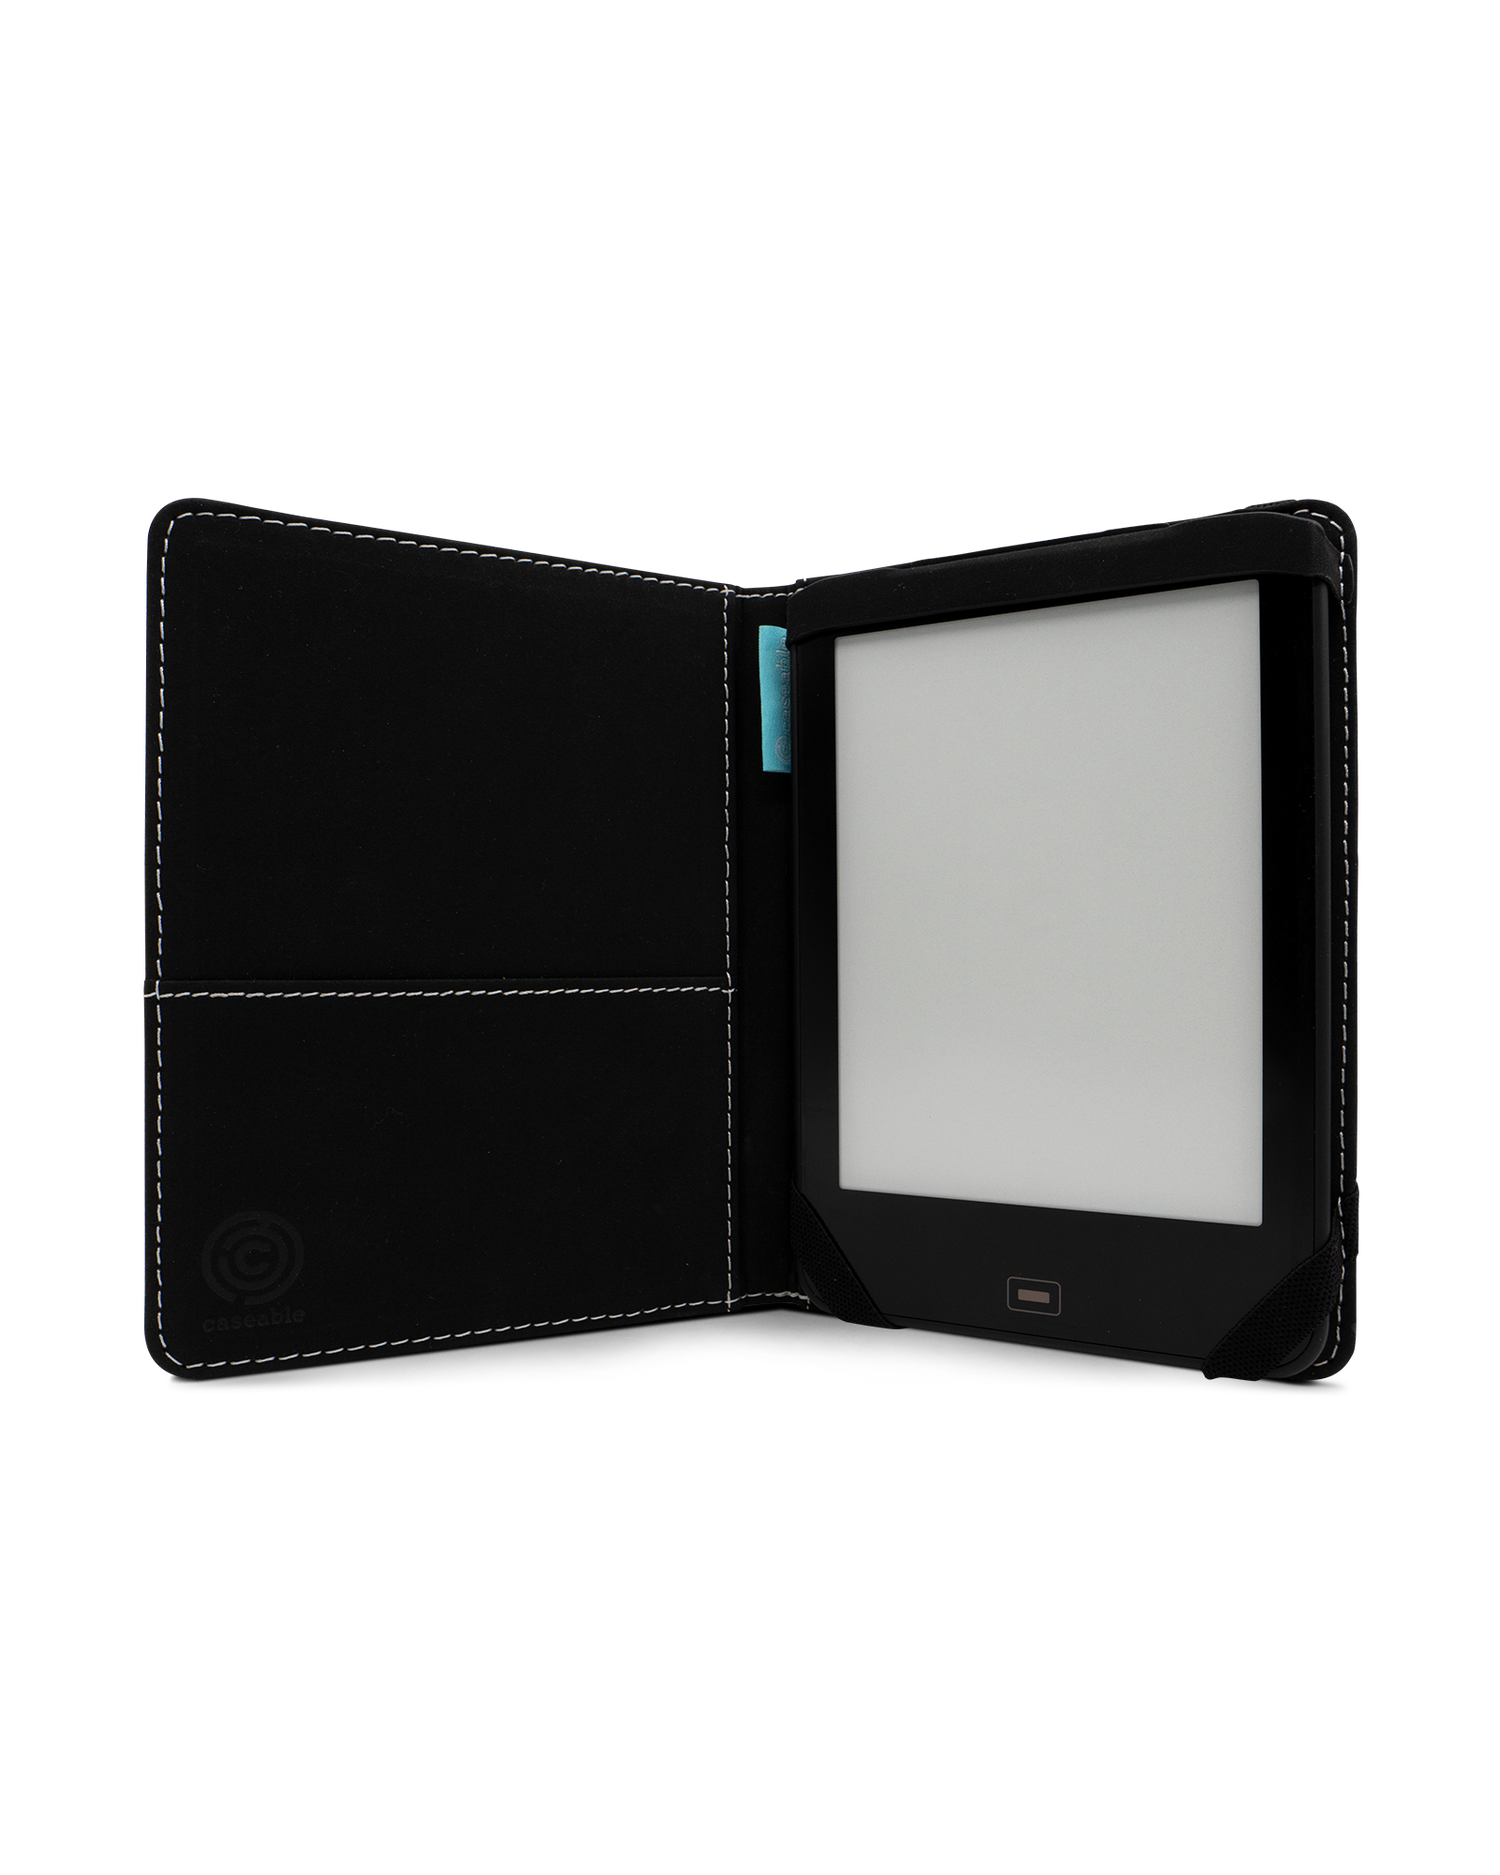 Oxford eReader Case for tolino vision 1 to 4 HD: Opened interior view